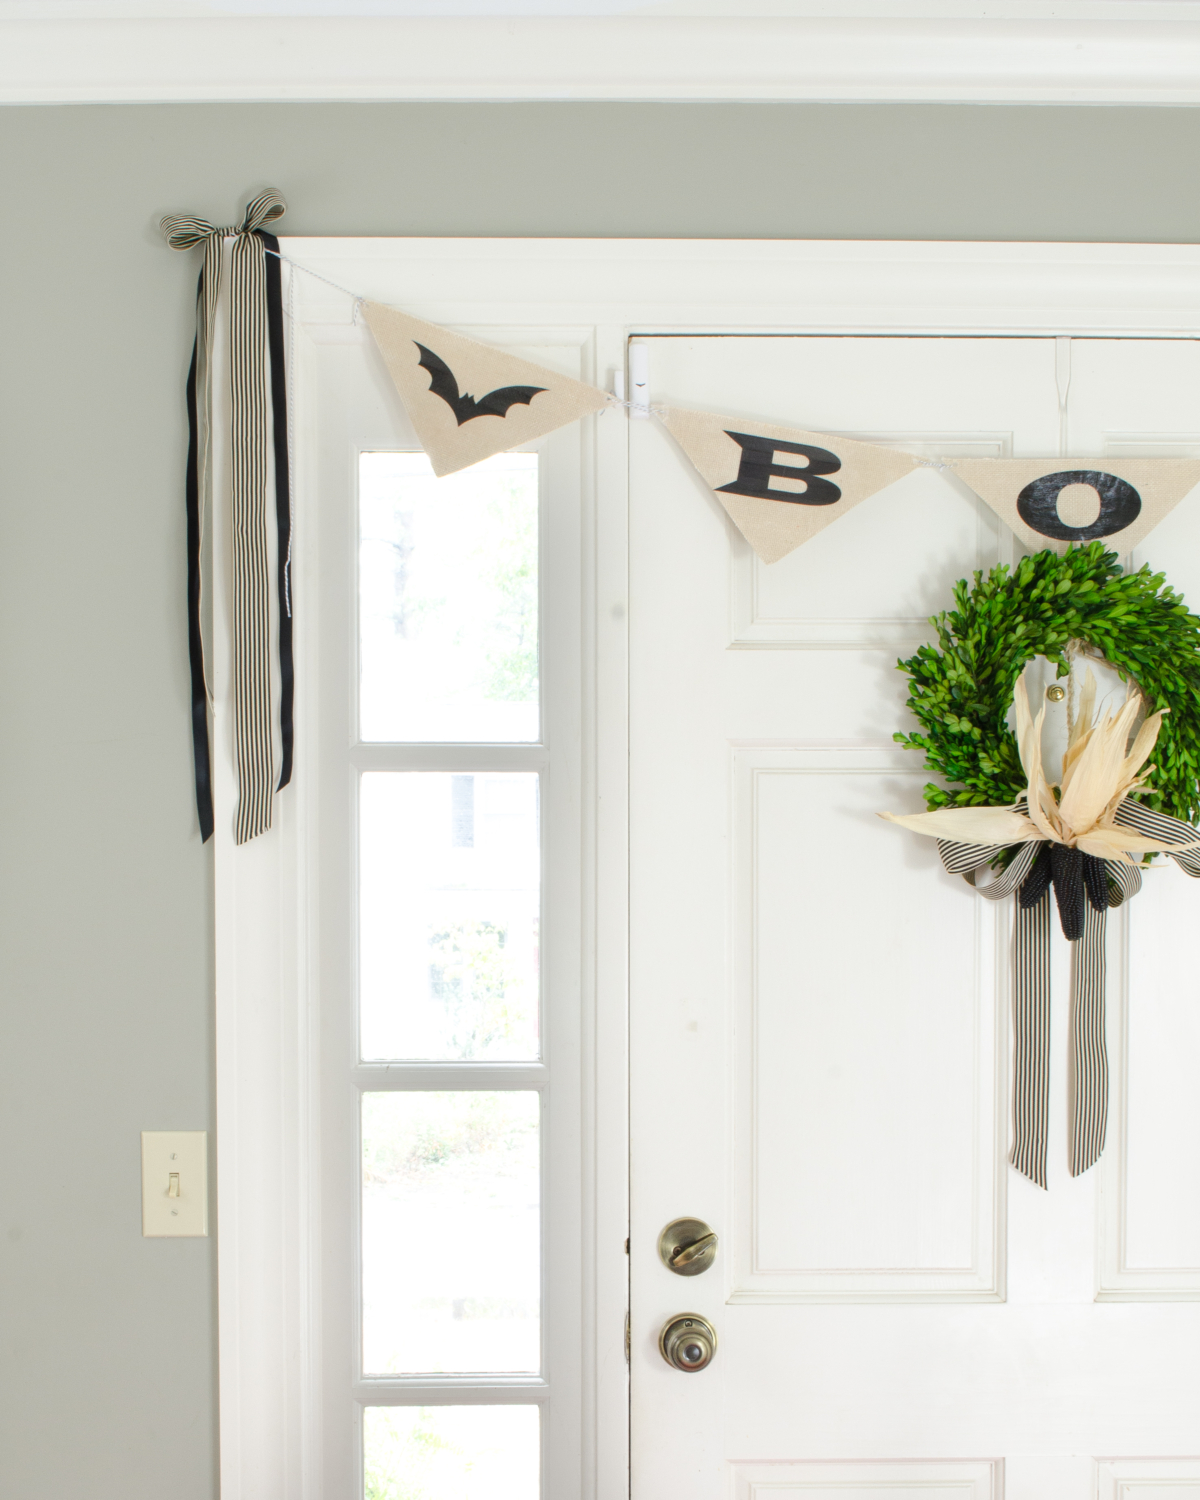 A simple Halloween banner you can print out at home for free - can't beat free Halloween decorations!